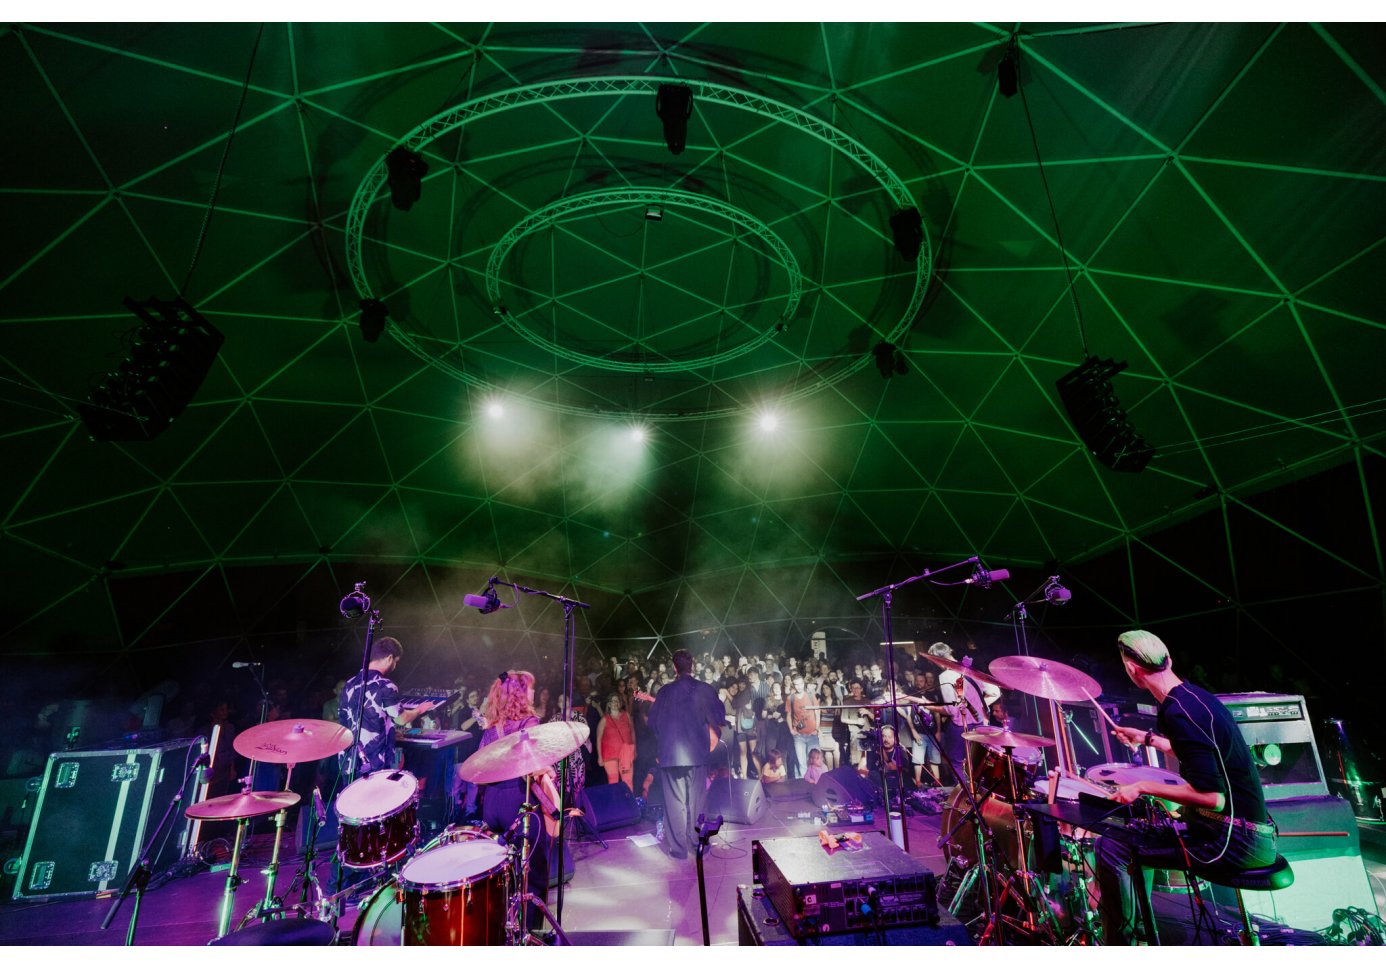 a band performing on stage under a dome-like structure, green and purple lighting